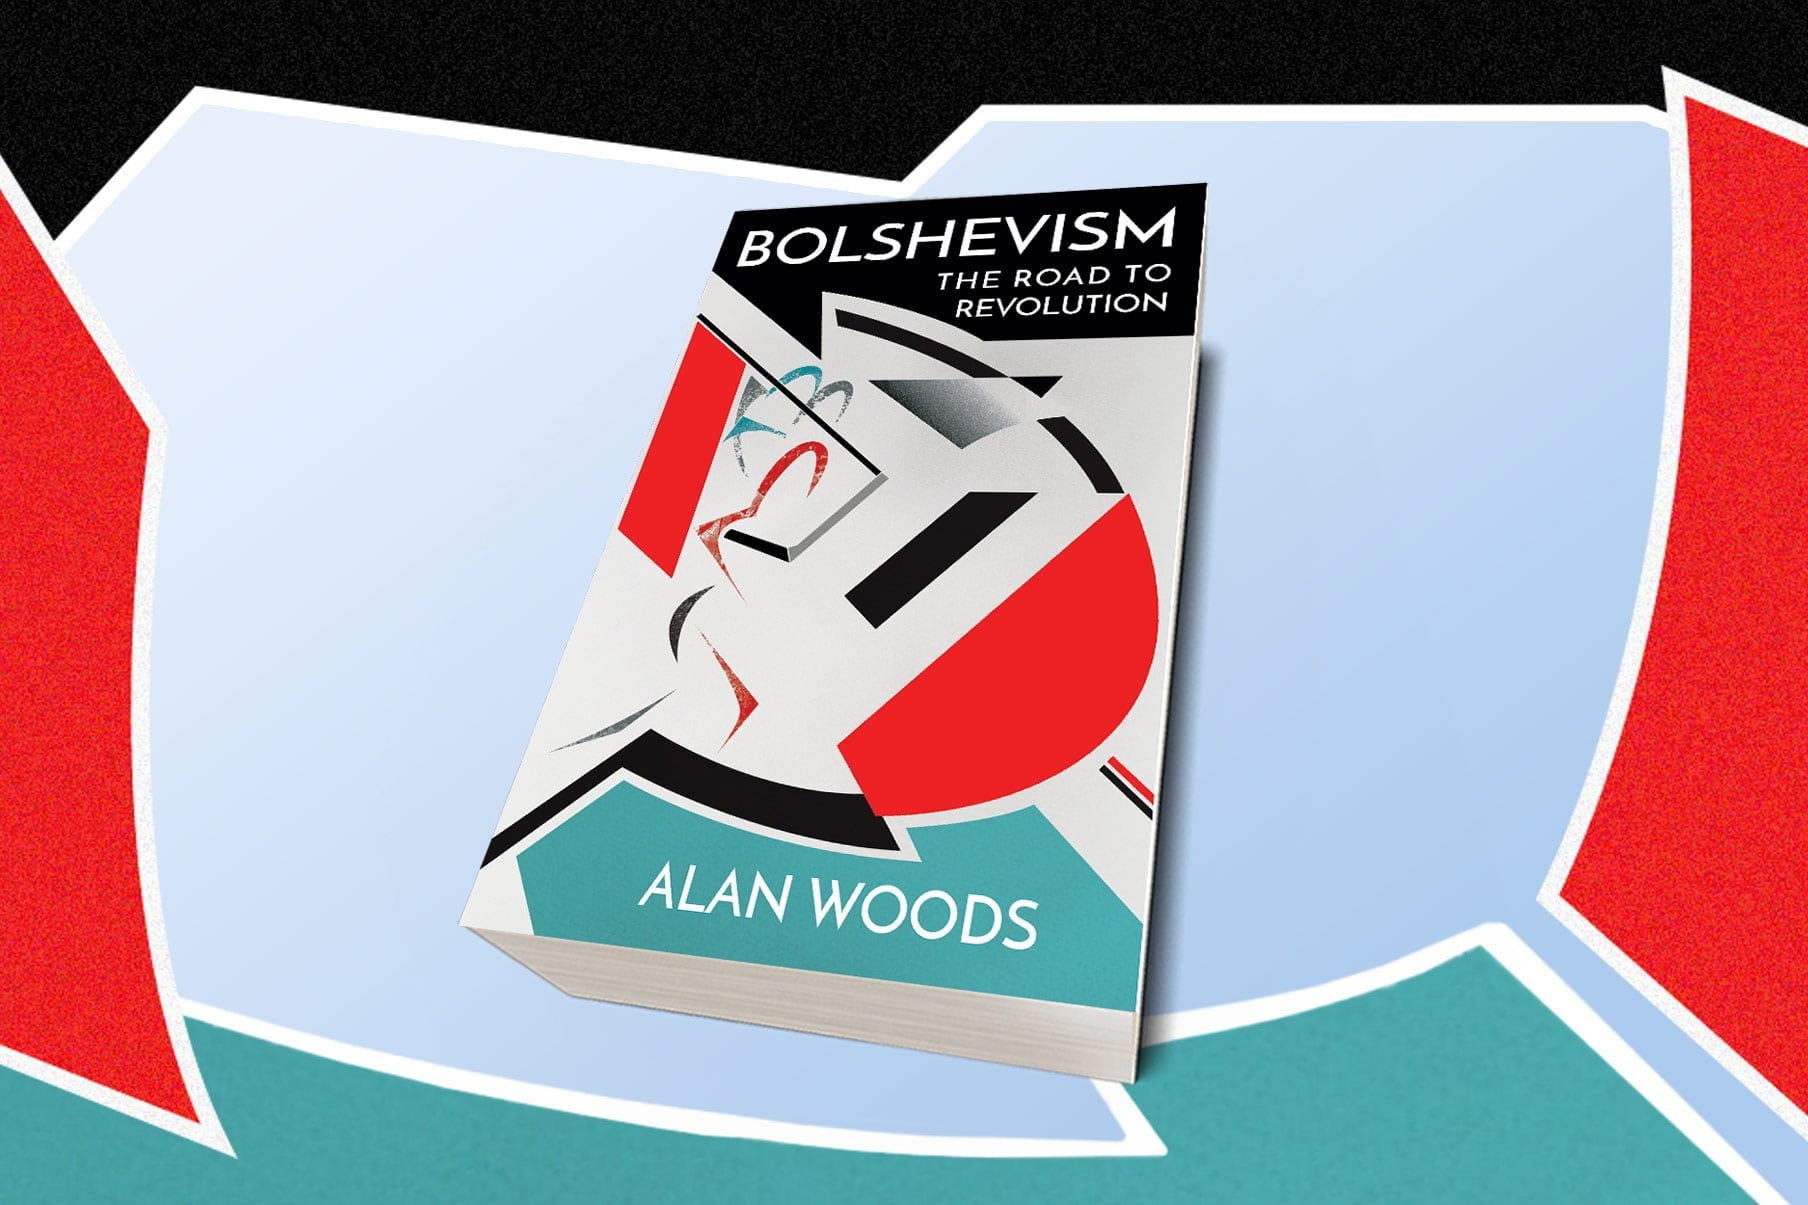 Bolshevism: The Road to Revolution - a reading guide